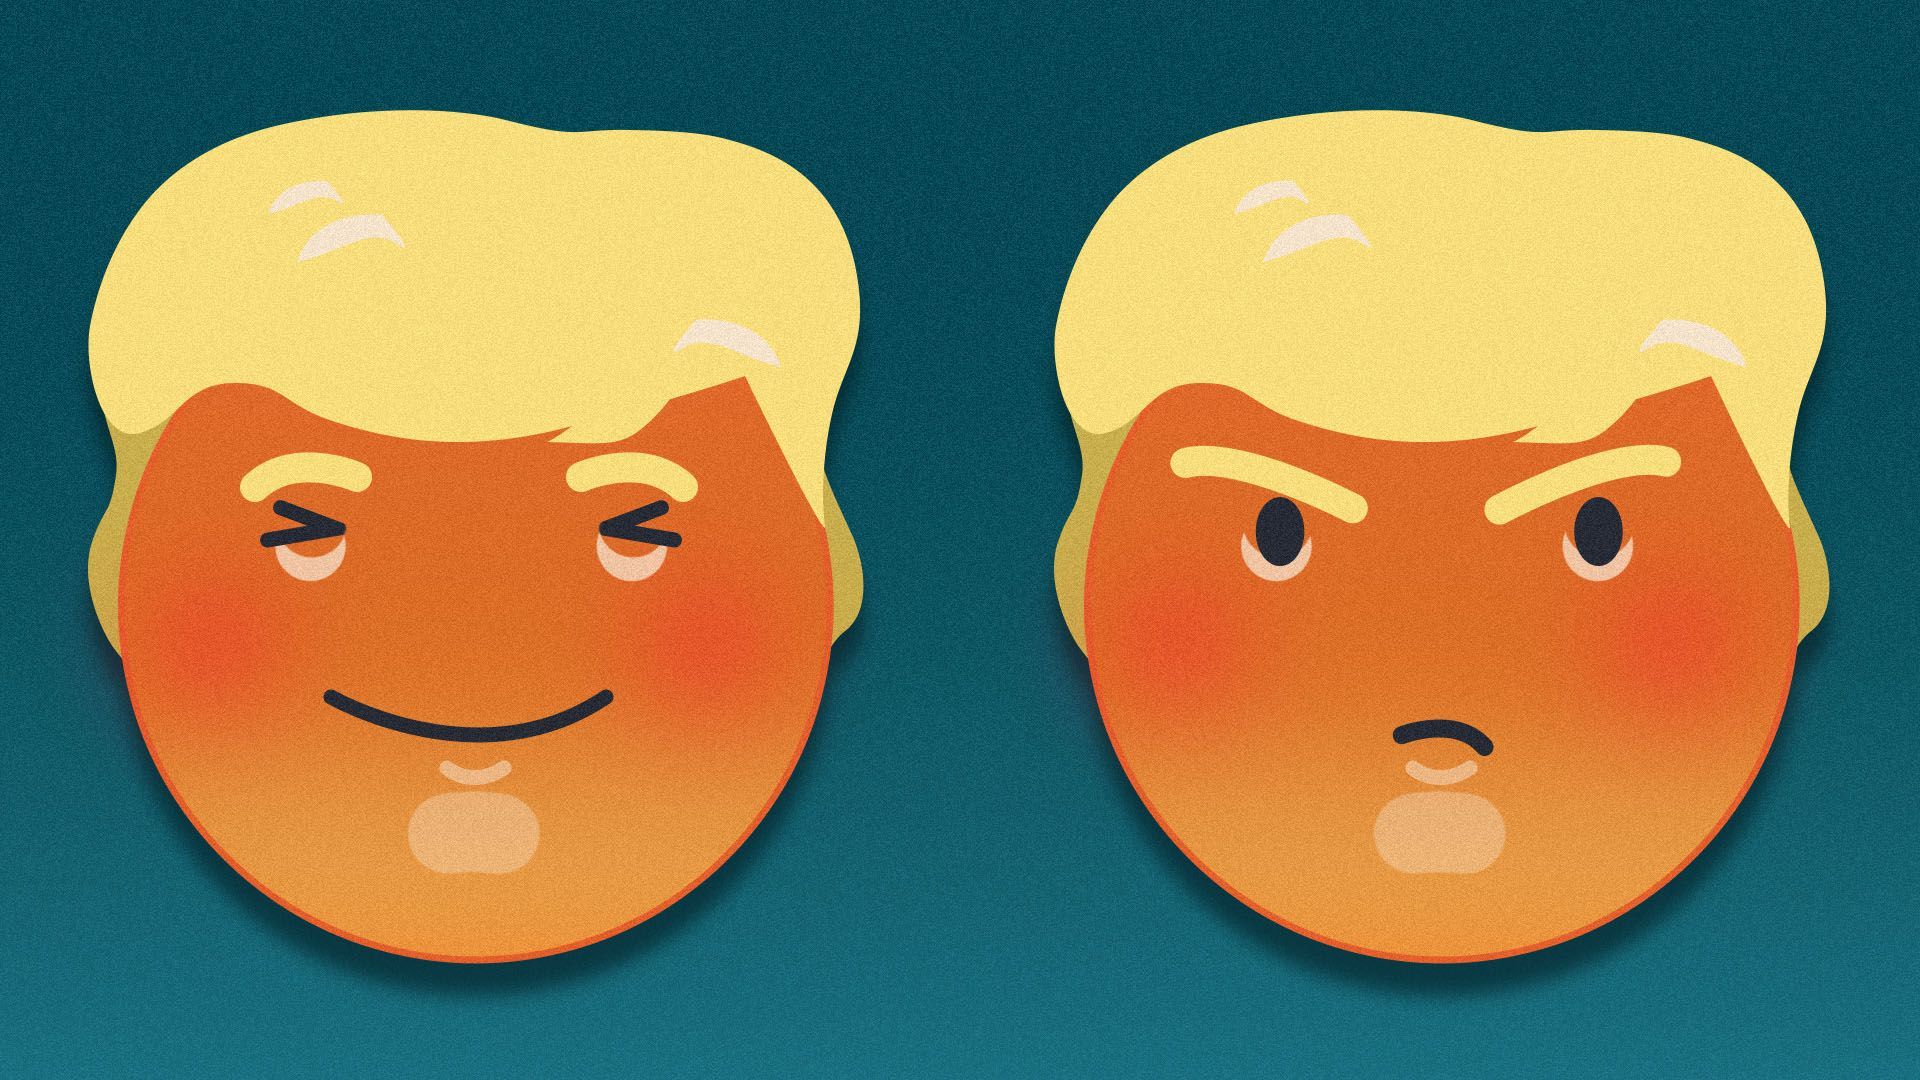 Illustration of a happy and mad President Trump-shaped emojis